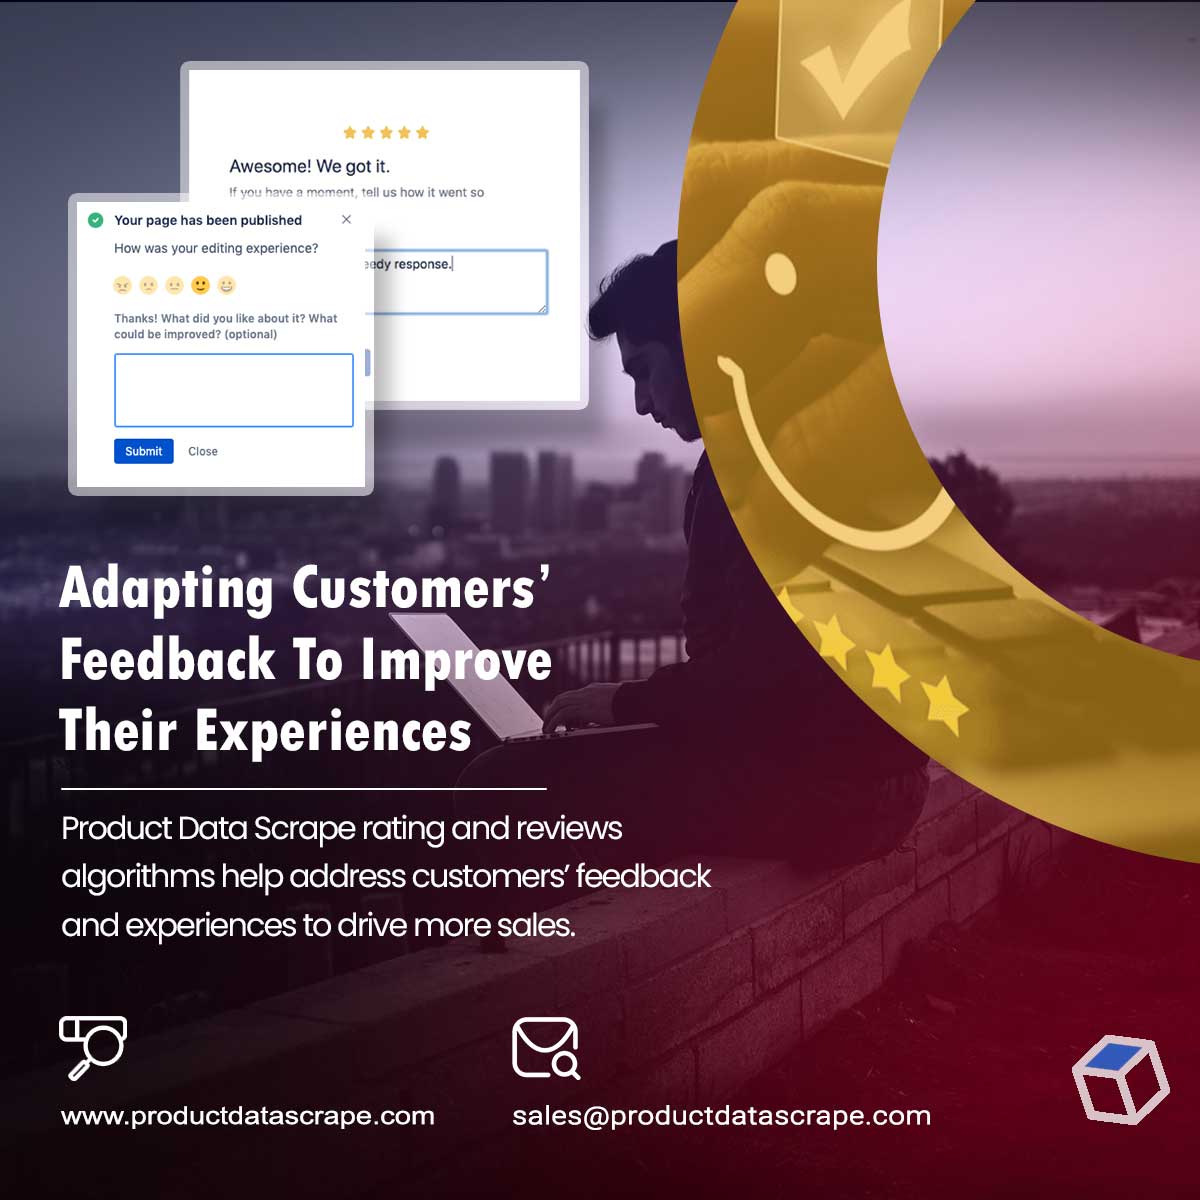 #Ratings and #Reviews are the primary drivers for the #digitalshelf experience. Provide your customer with a #trustworthy experience using user-generated content.

>> productdatascrape.com/ratings-review…

#CustomerFeedback #CustomerExperiences #ScrapeCustomerReviews #Productdatascrape #usa